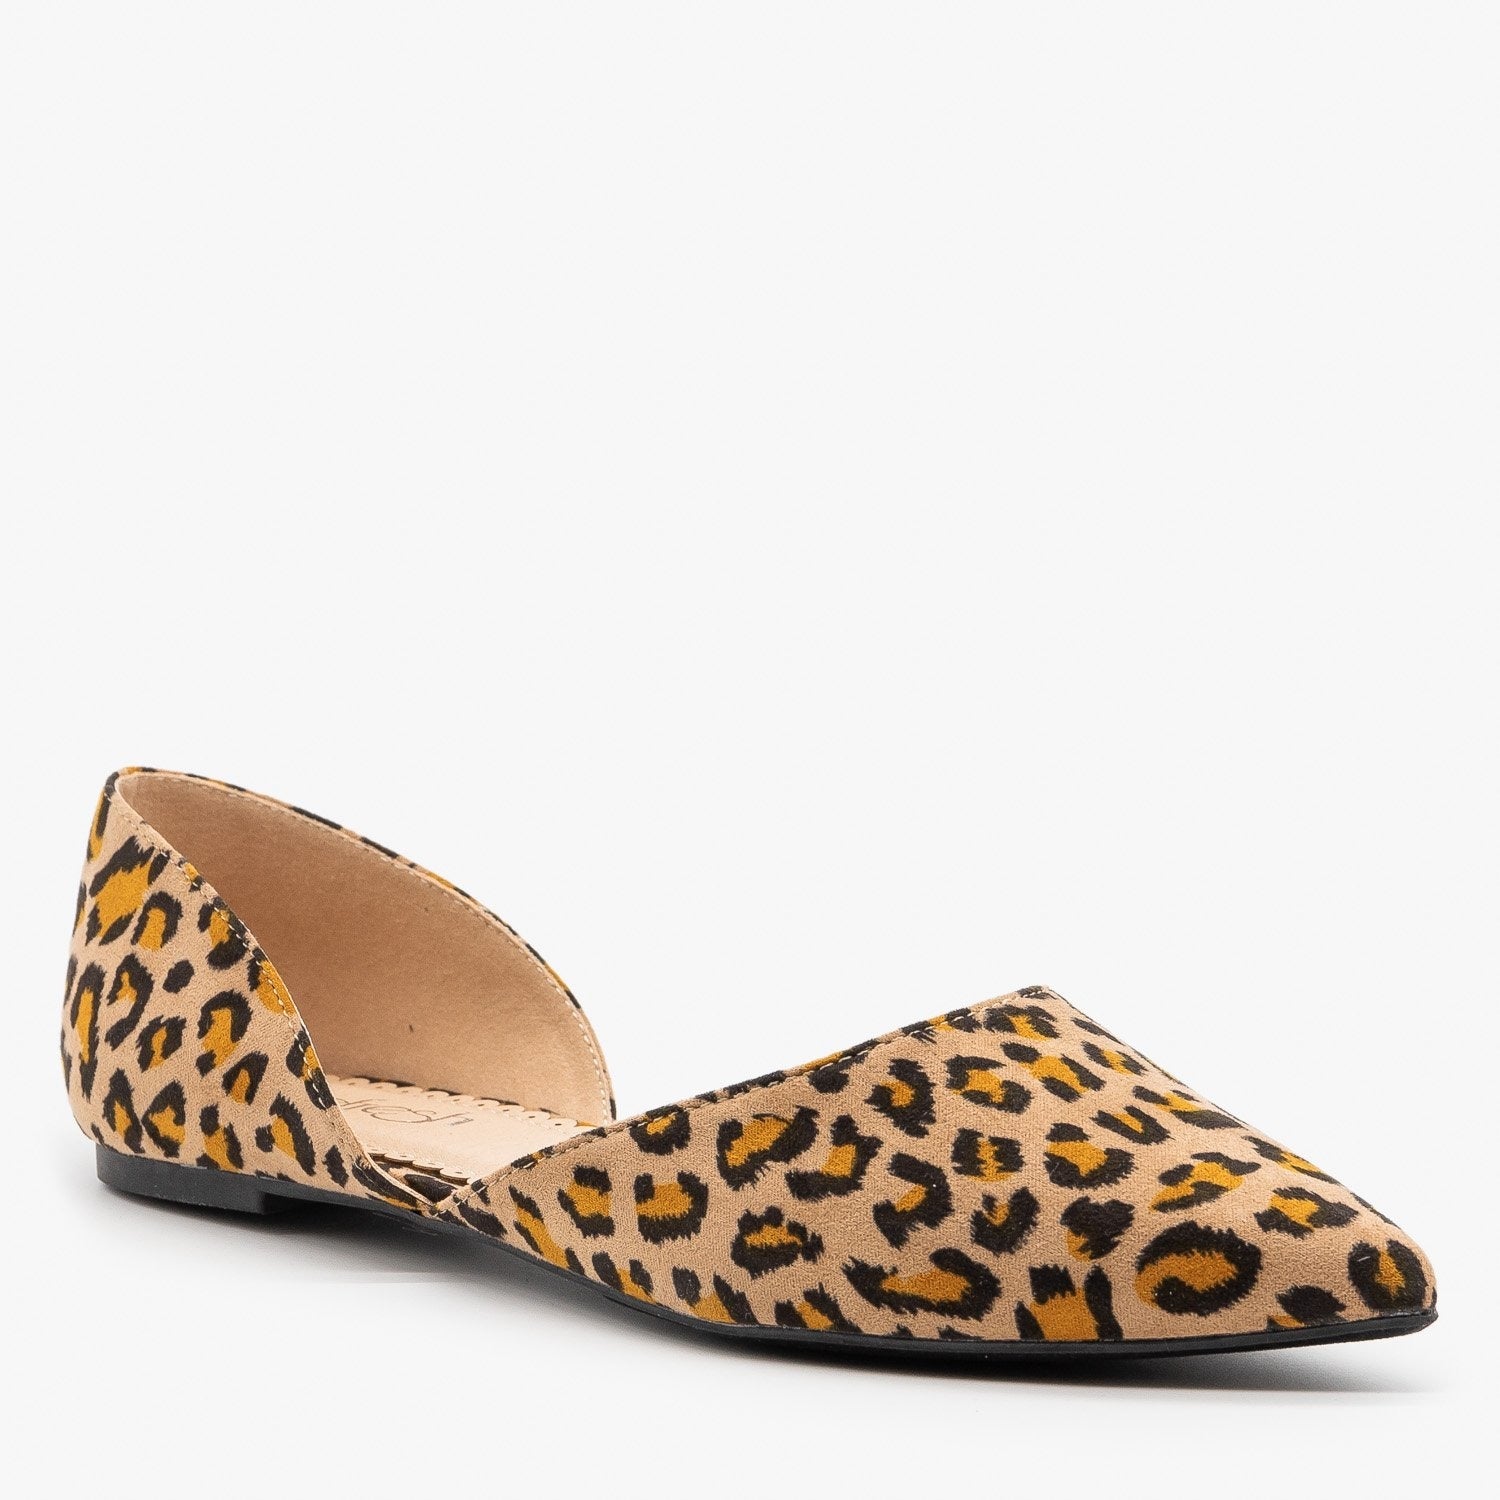 leopard pointed toe flats